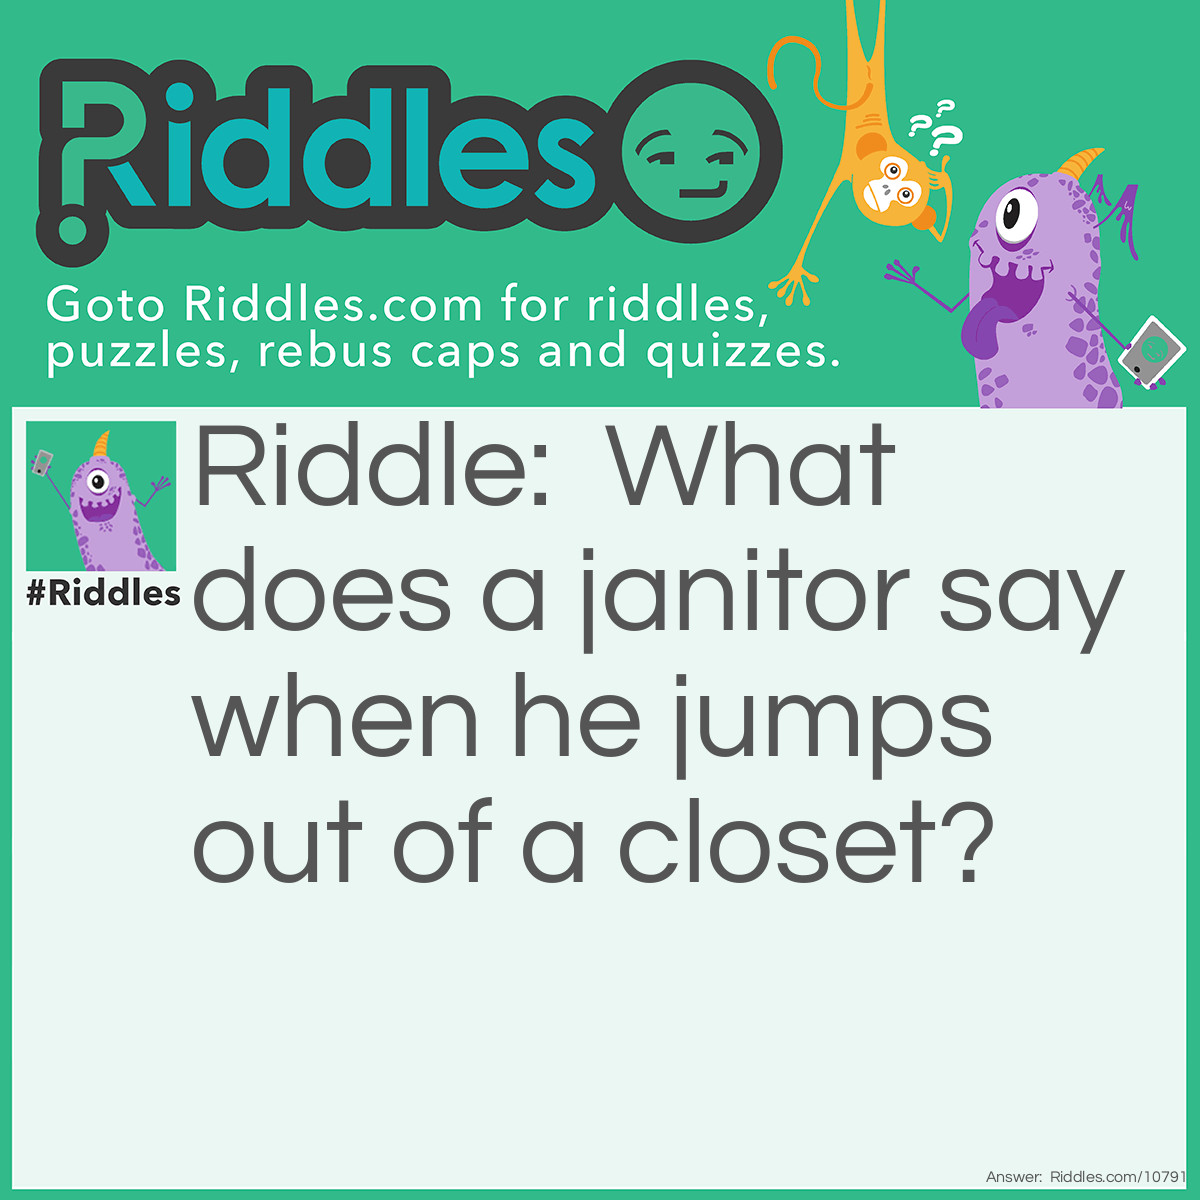 Riddle: What does a janitor say when he jumps out of a closet? Answer: SUPPLIES!